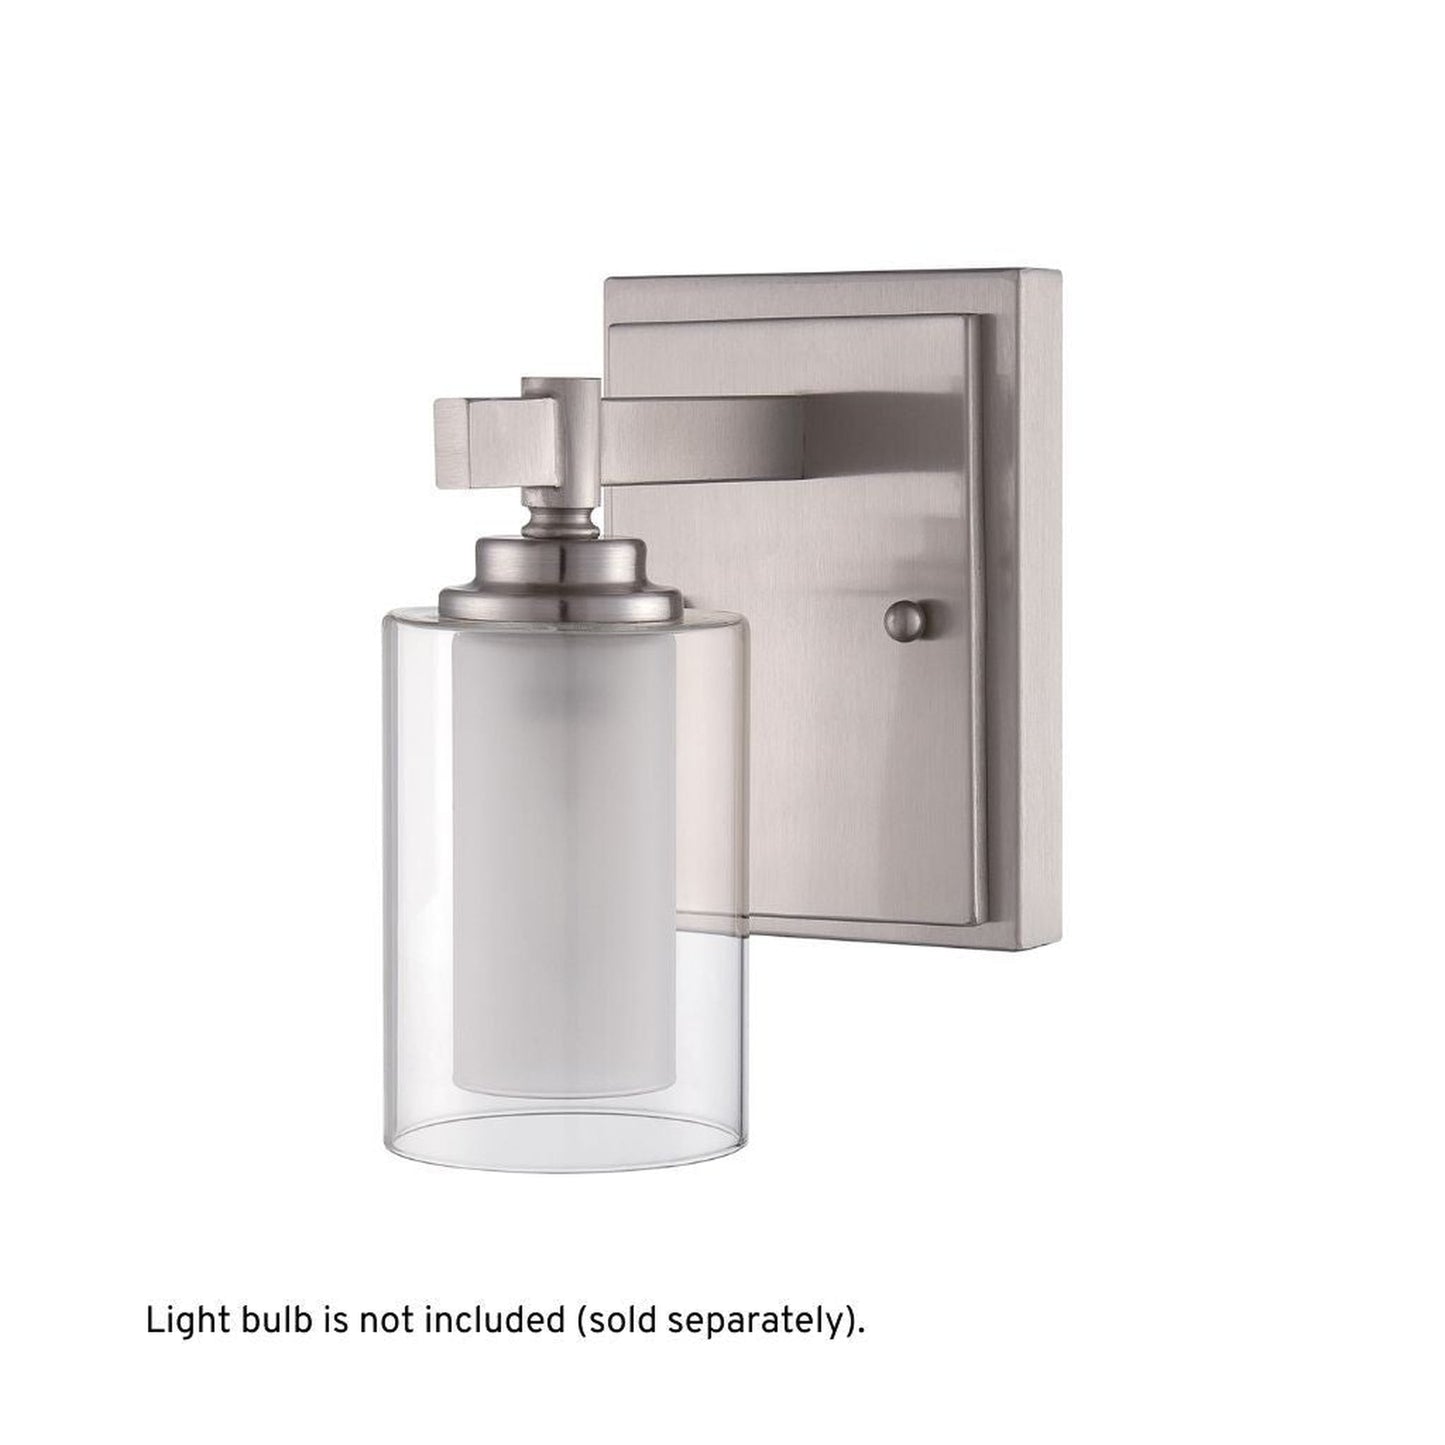 Craftmade Celeste 5" x 8" 1-Light Brushed Polished Nickel Wall Sconce With Clear Outer and Frosted Inner Glass Shade